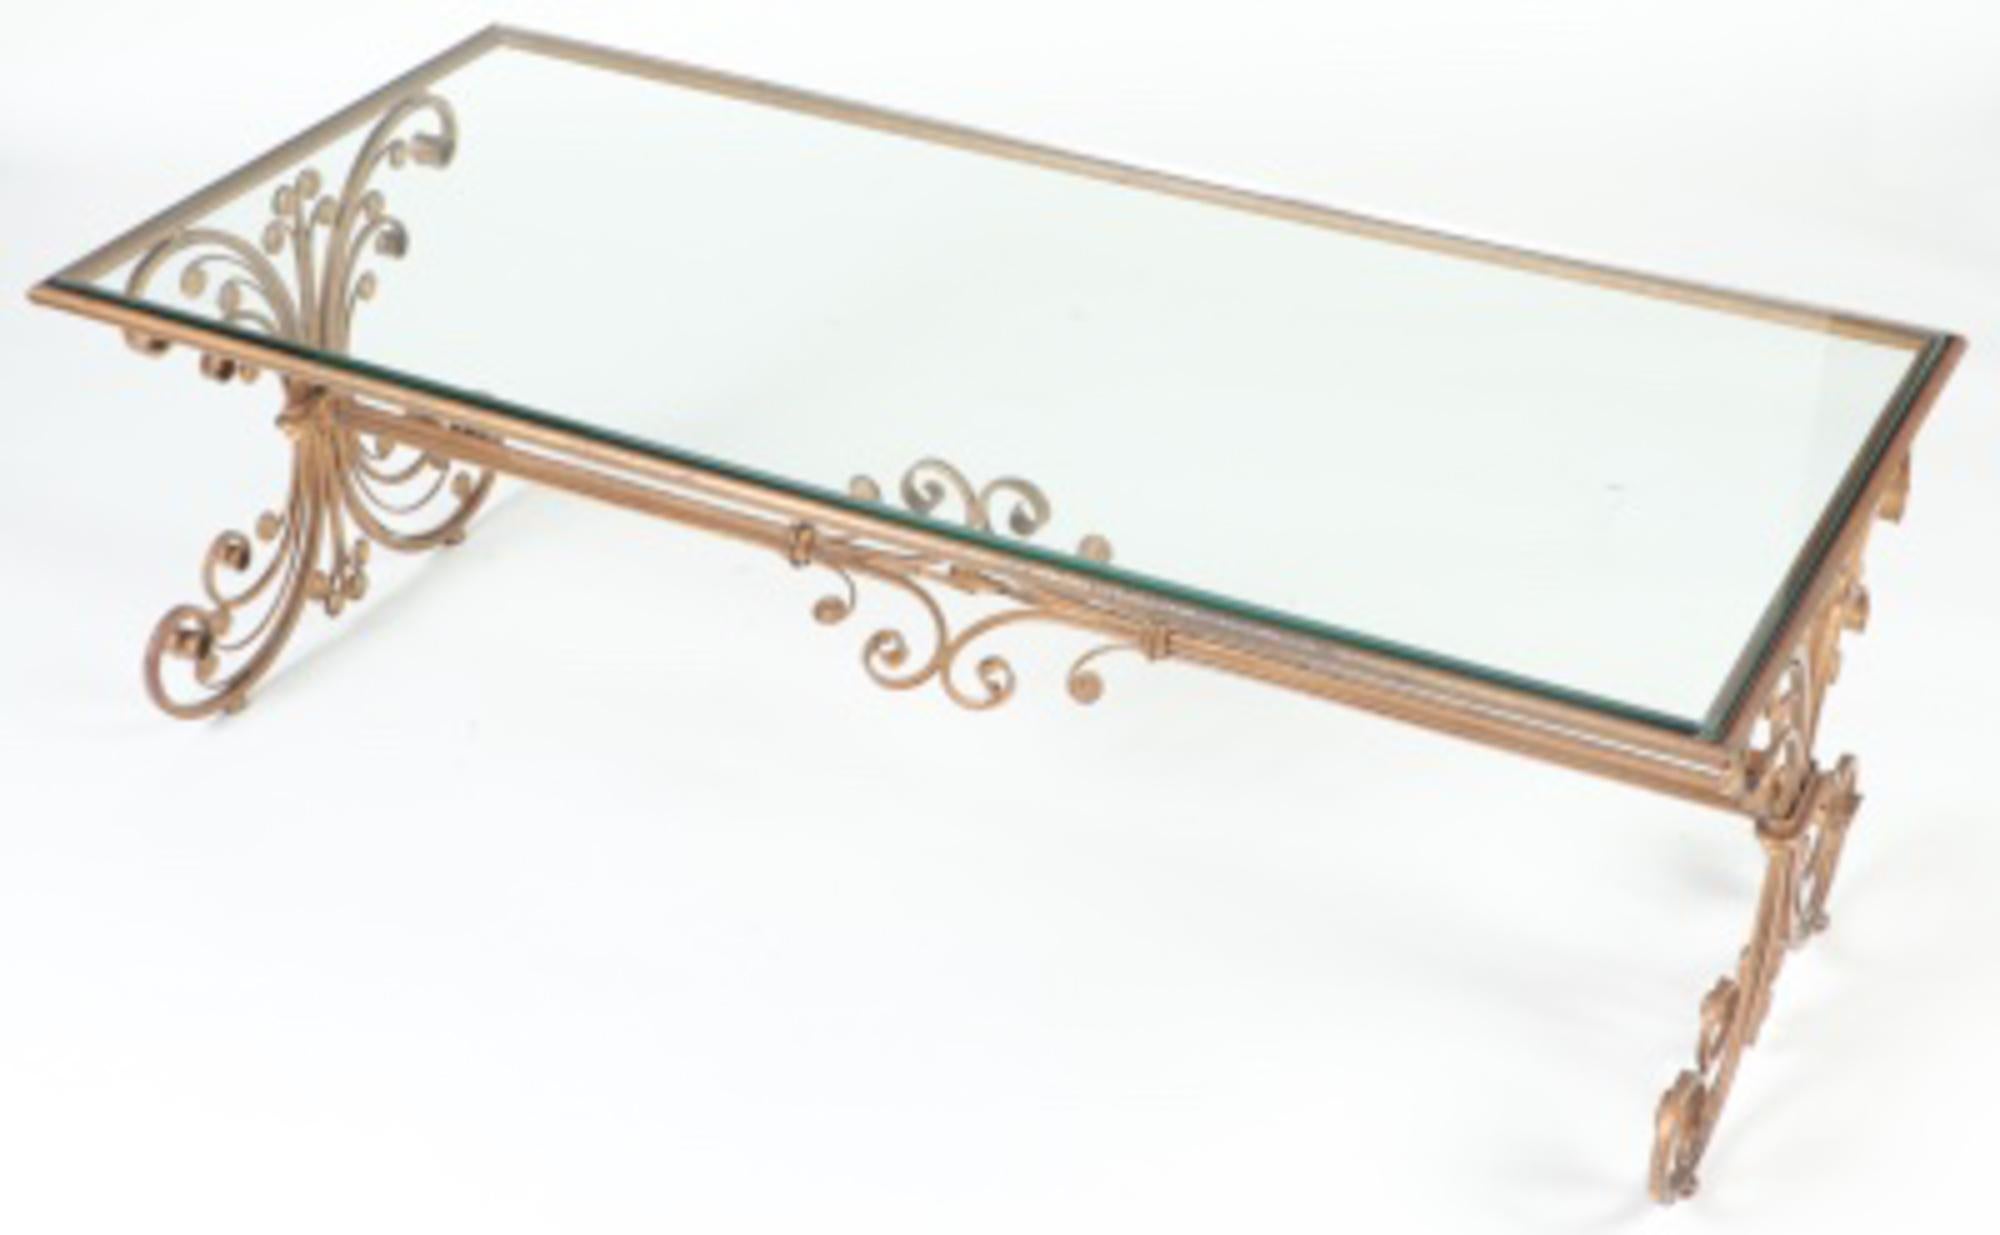 A French cocktail or coffee table with gilded iron base and glass top, having scrolled feet. Circa 1960.
We are located in Philadelphia and offer expedited shipping to the NYC area on many of our items.